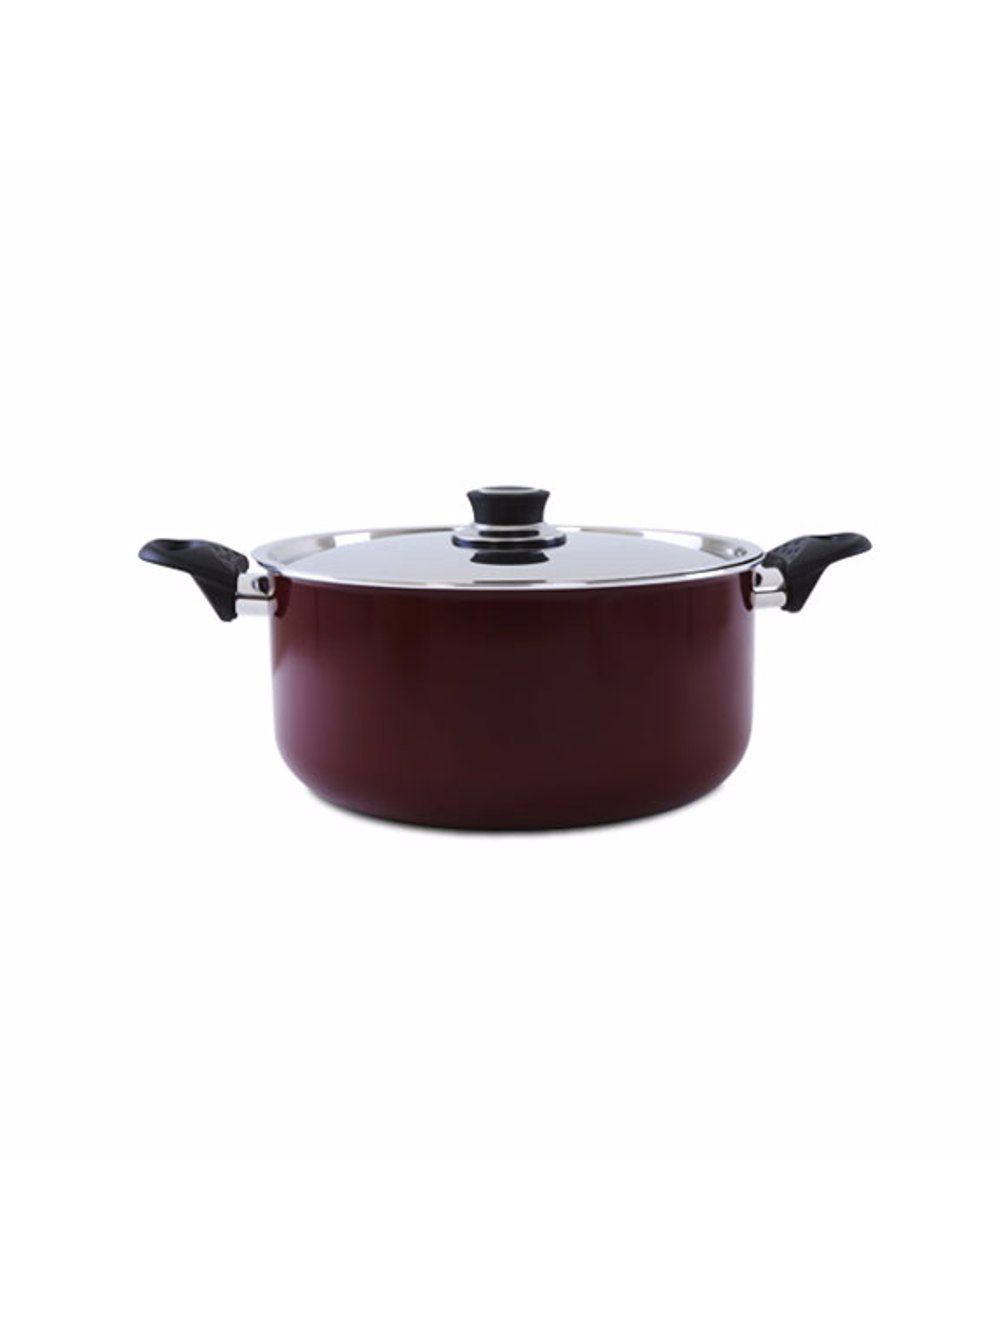 Royalford RF391C26 Non-Stick Cookware with Lid, 26 cm